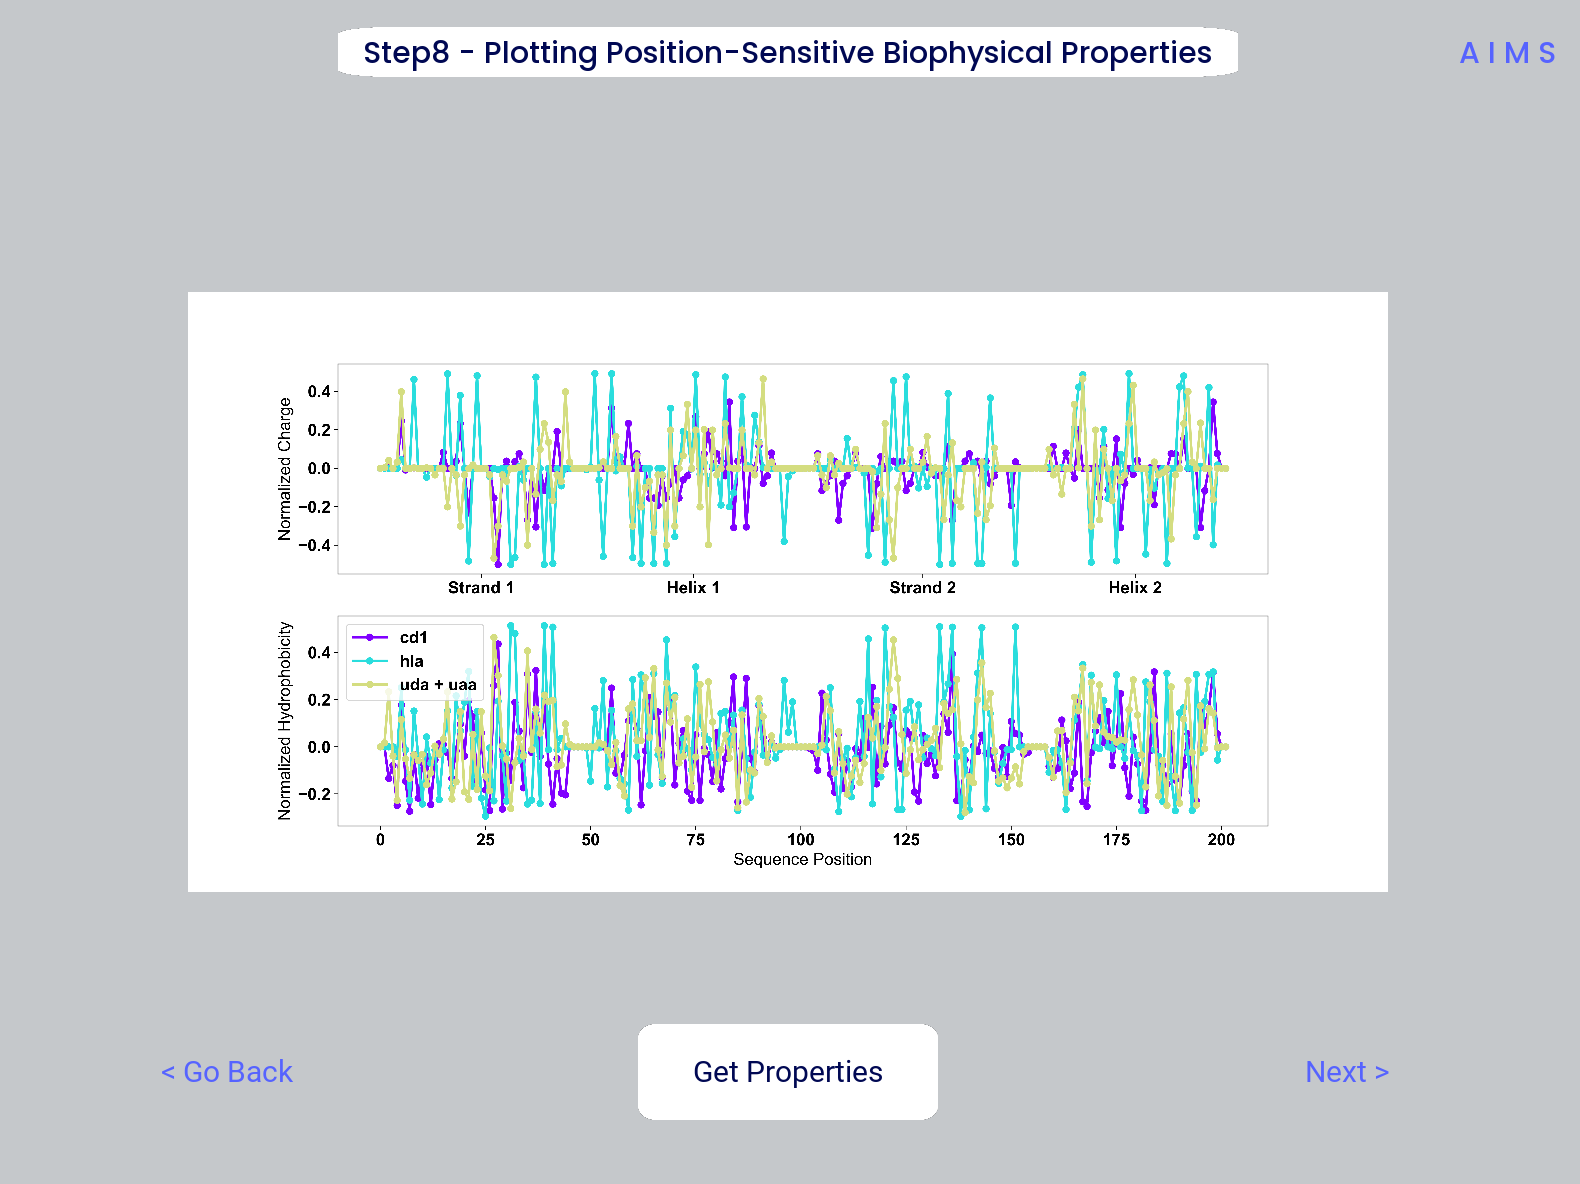 Example screenshot of the averaged position-sensitive biophysical properties